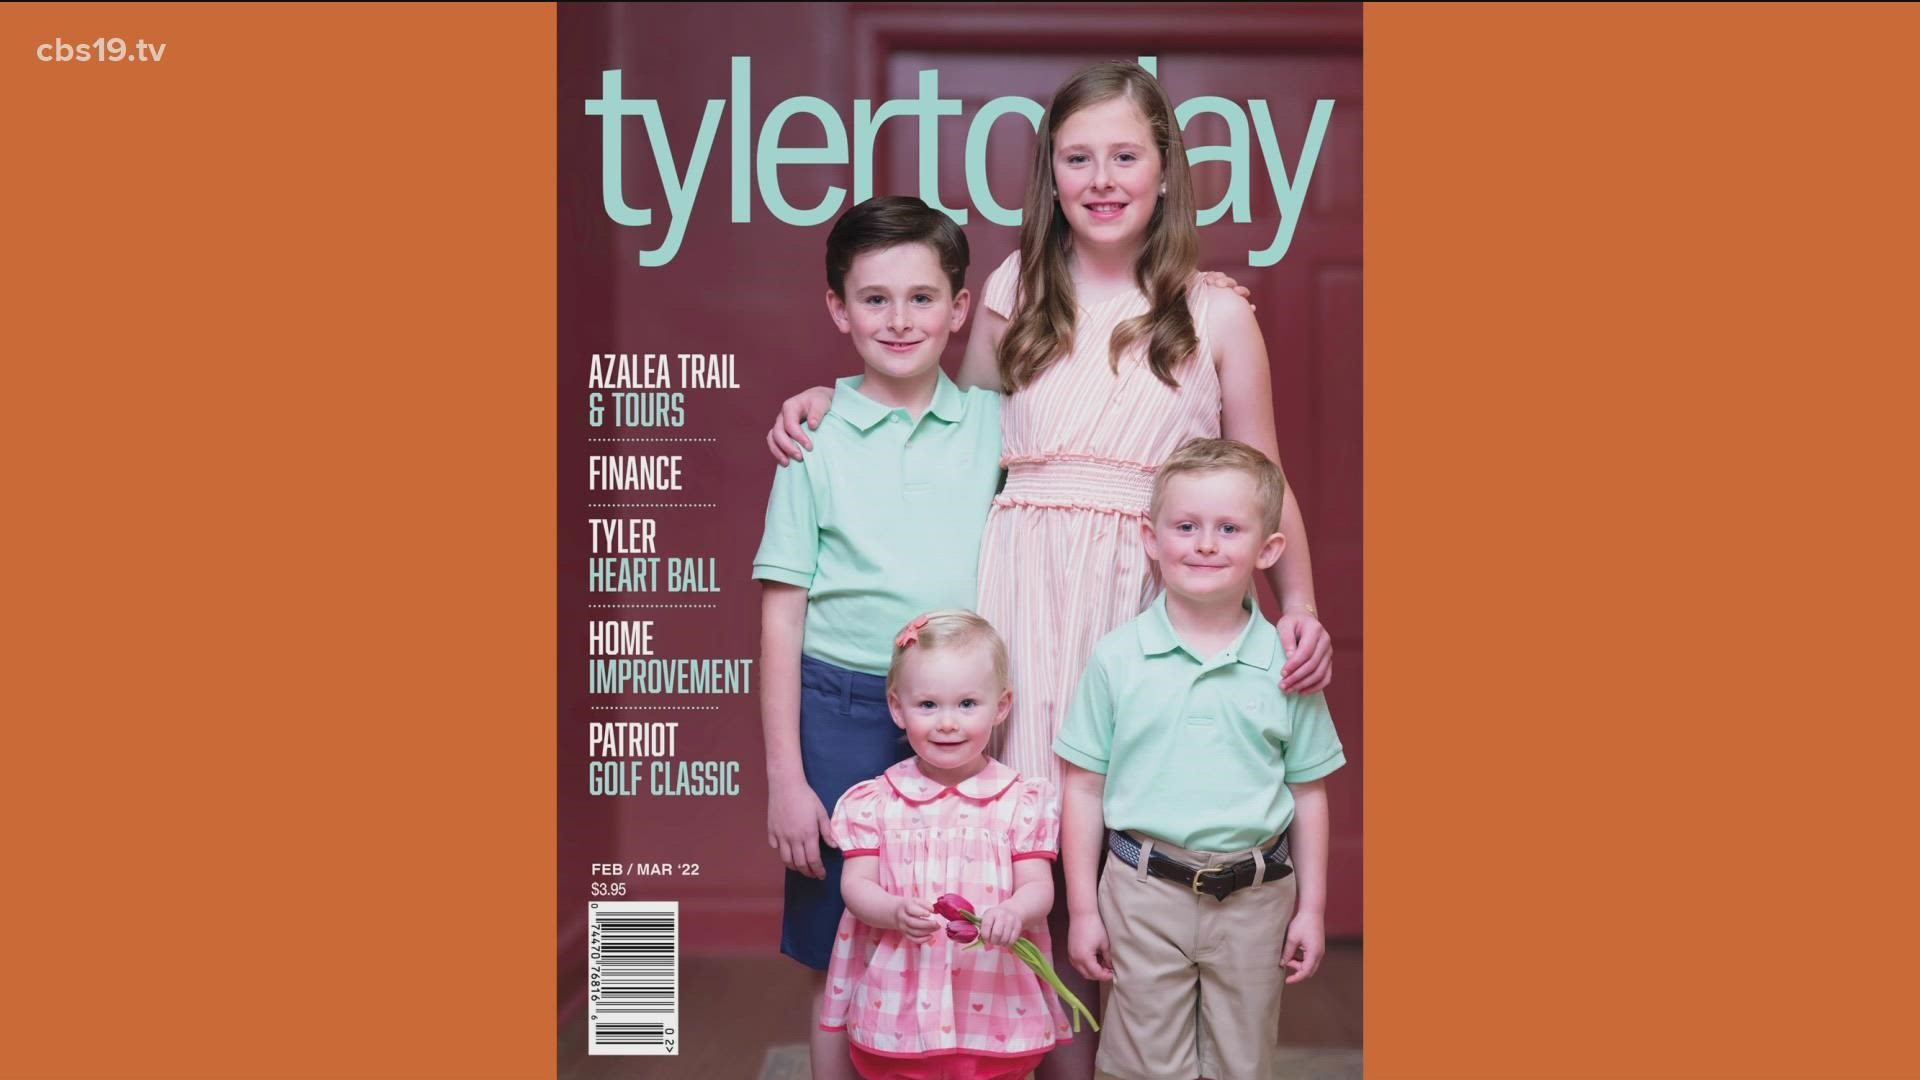 The February/March issue of Tyler Today hit shelves. We've got a sneak peak of what's inside from Historic Tyler on Tour to the Azalea Trails and home improvement.